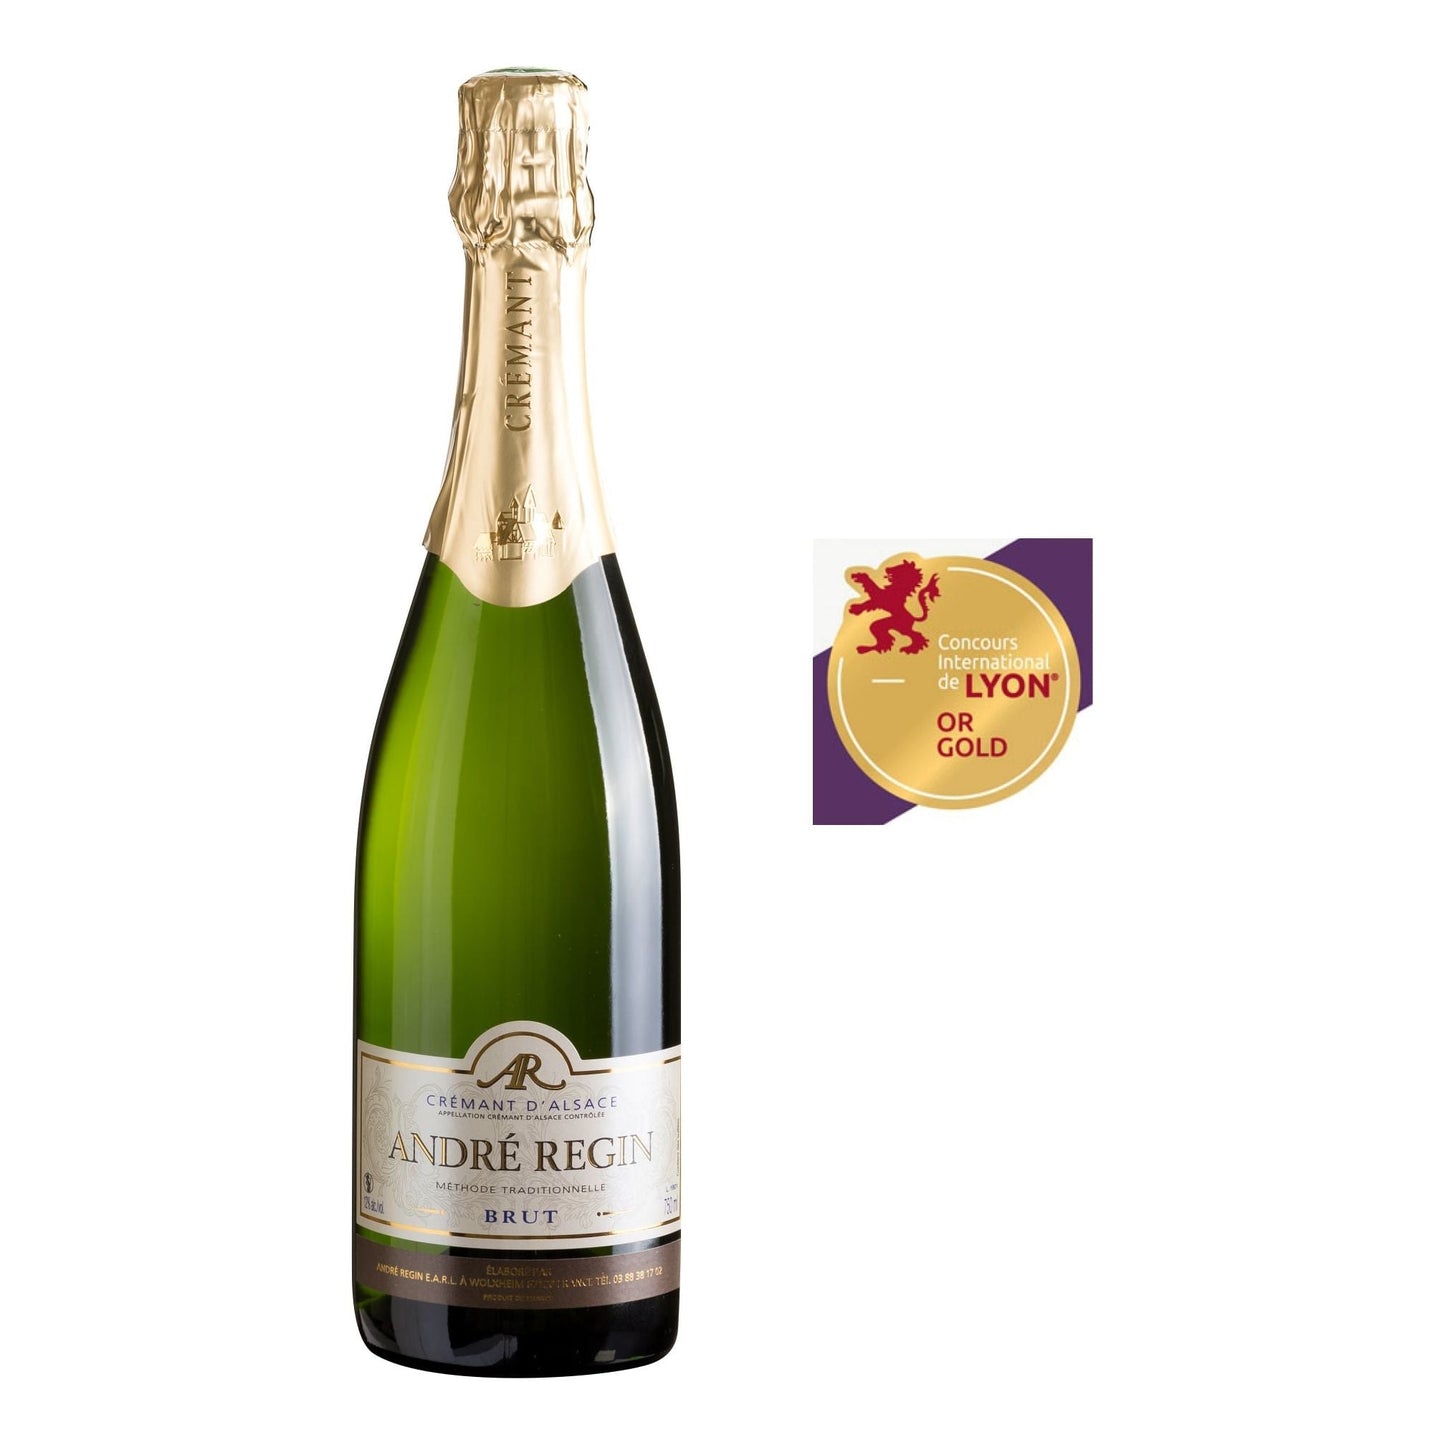 Crémant D'Alsace Gift Set with two Glasses - www.absoluteorganicwine.com